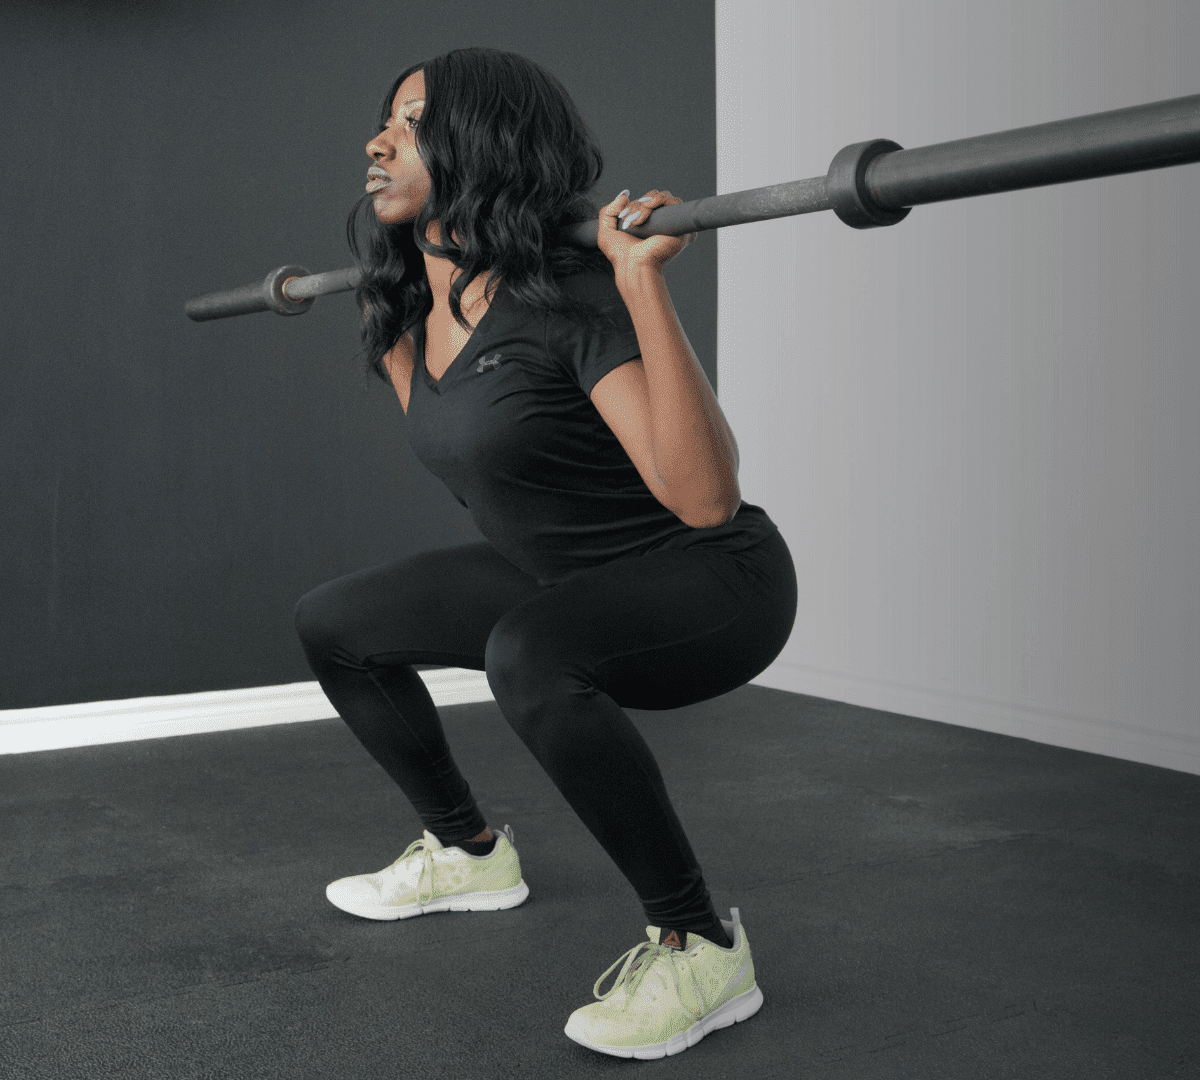 The Right Way to Squat (And Solve The “Butt Wink” Issue)